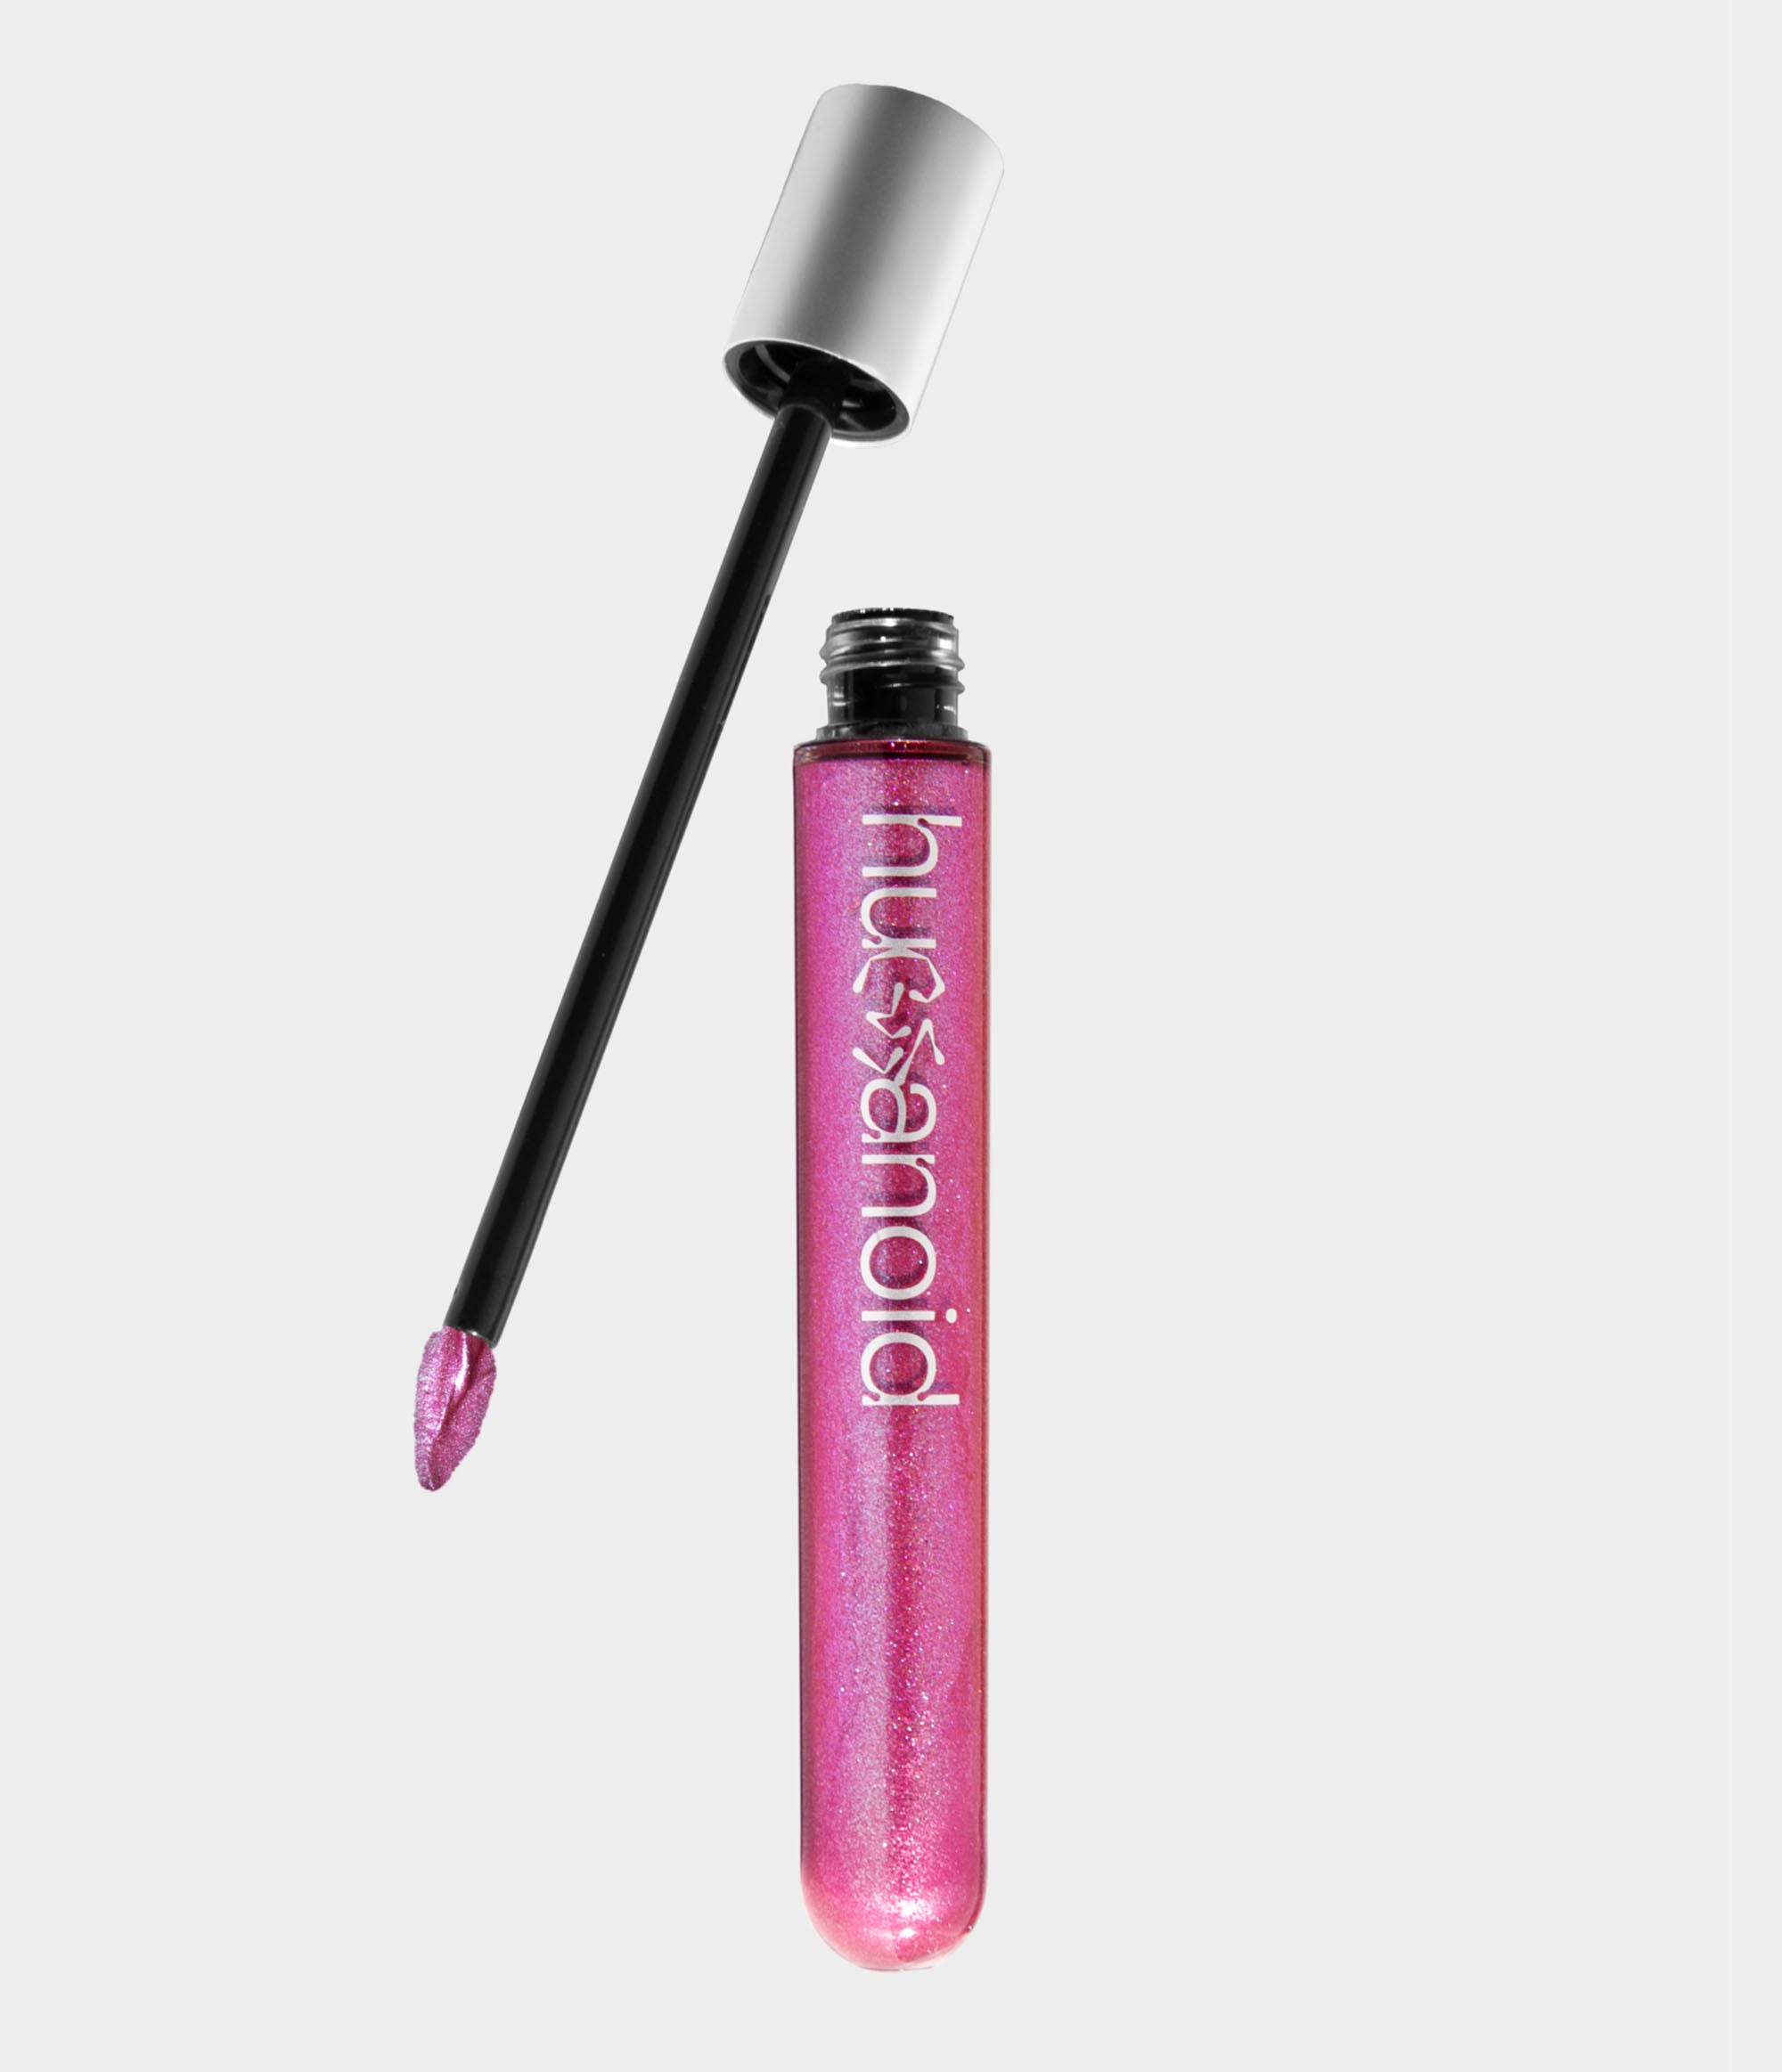 A transparent tube of shimmery pink liquid makeup with an unscrewed silver cap sitting next to it. A doe foot makeup applicator coated in pink makeup extends out of the cap.